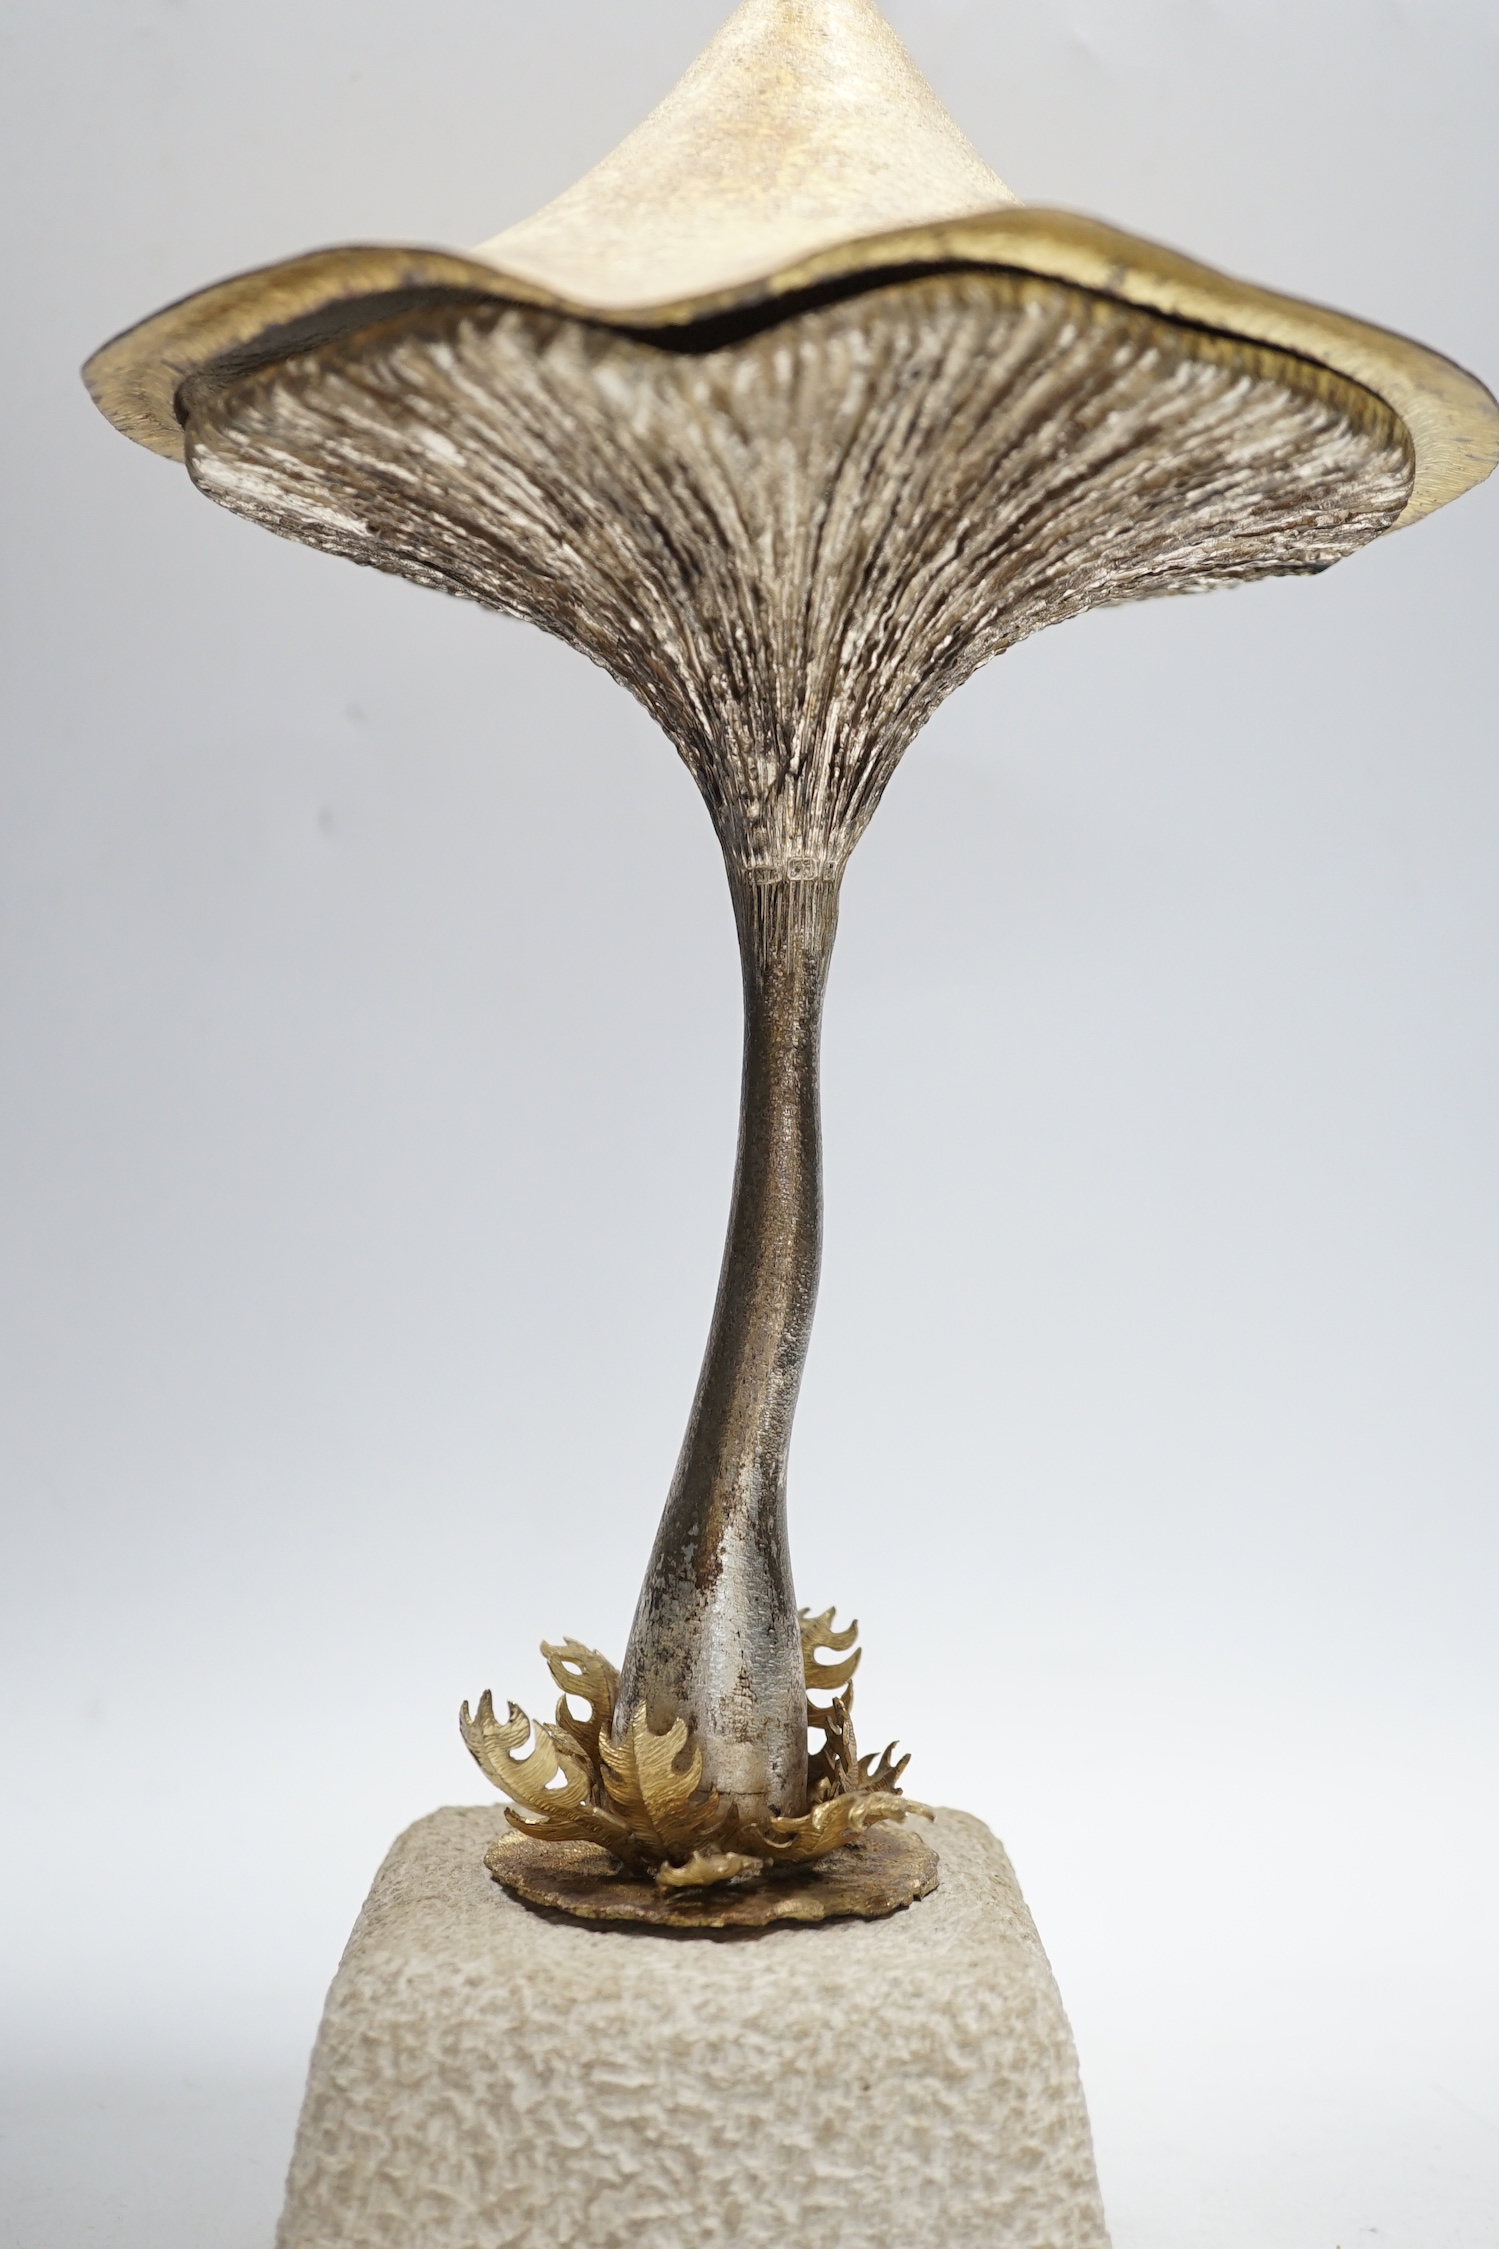 An Elizabeth II limited edition novelty surprise mushroom, by Christopher Nigel Lawrence, London, 1976, opening to reveal a pixie fishing, no.2/8, on a simulated rock base, overall height 29.5cm, with certificate.